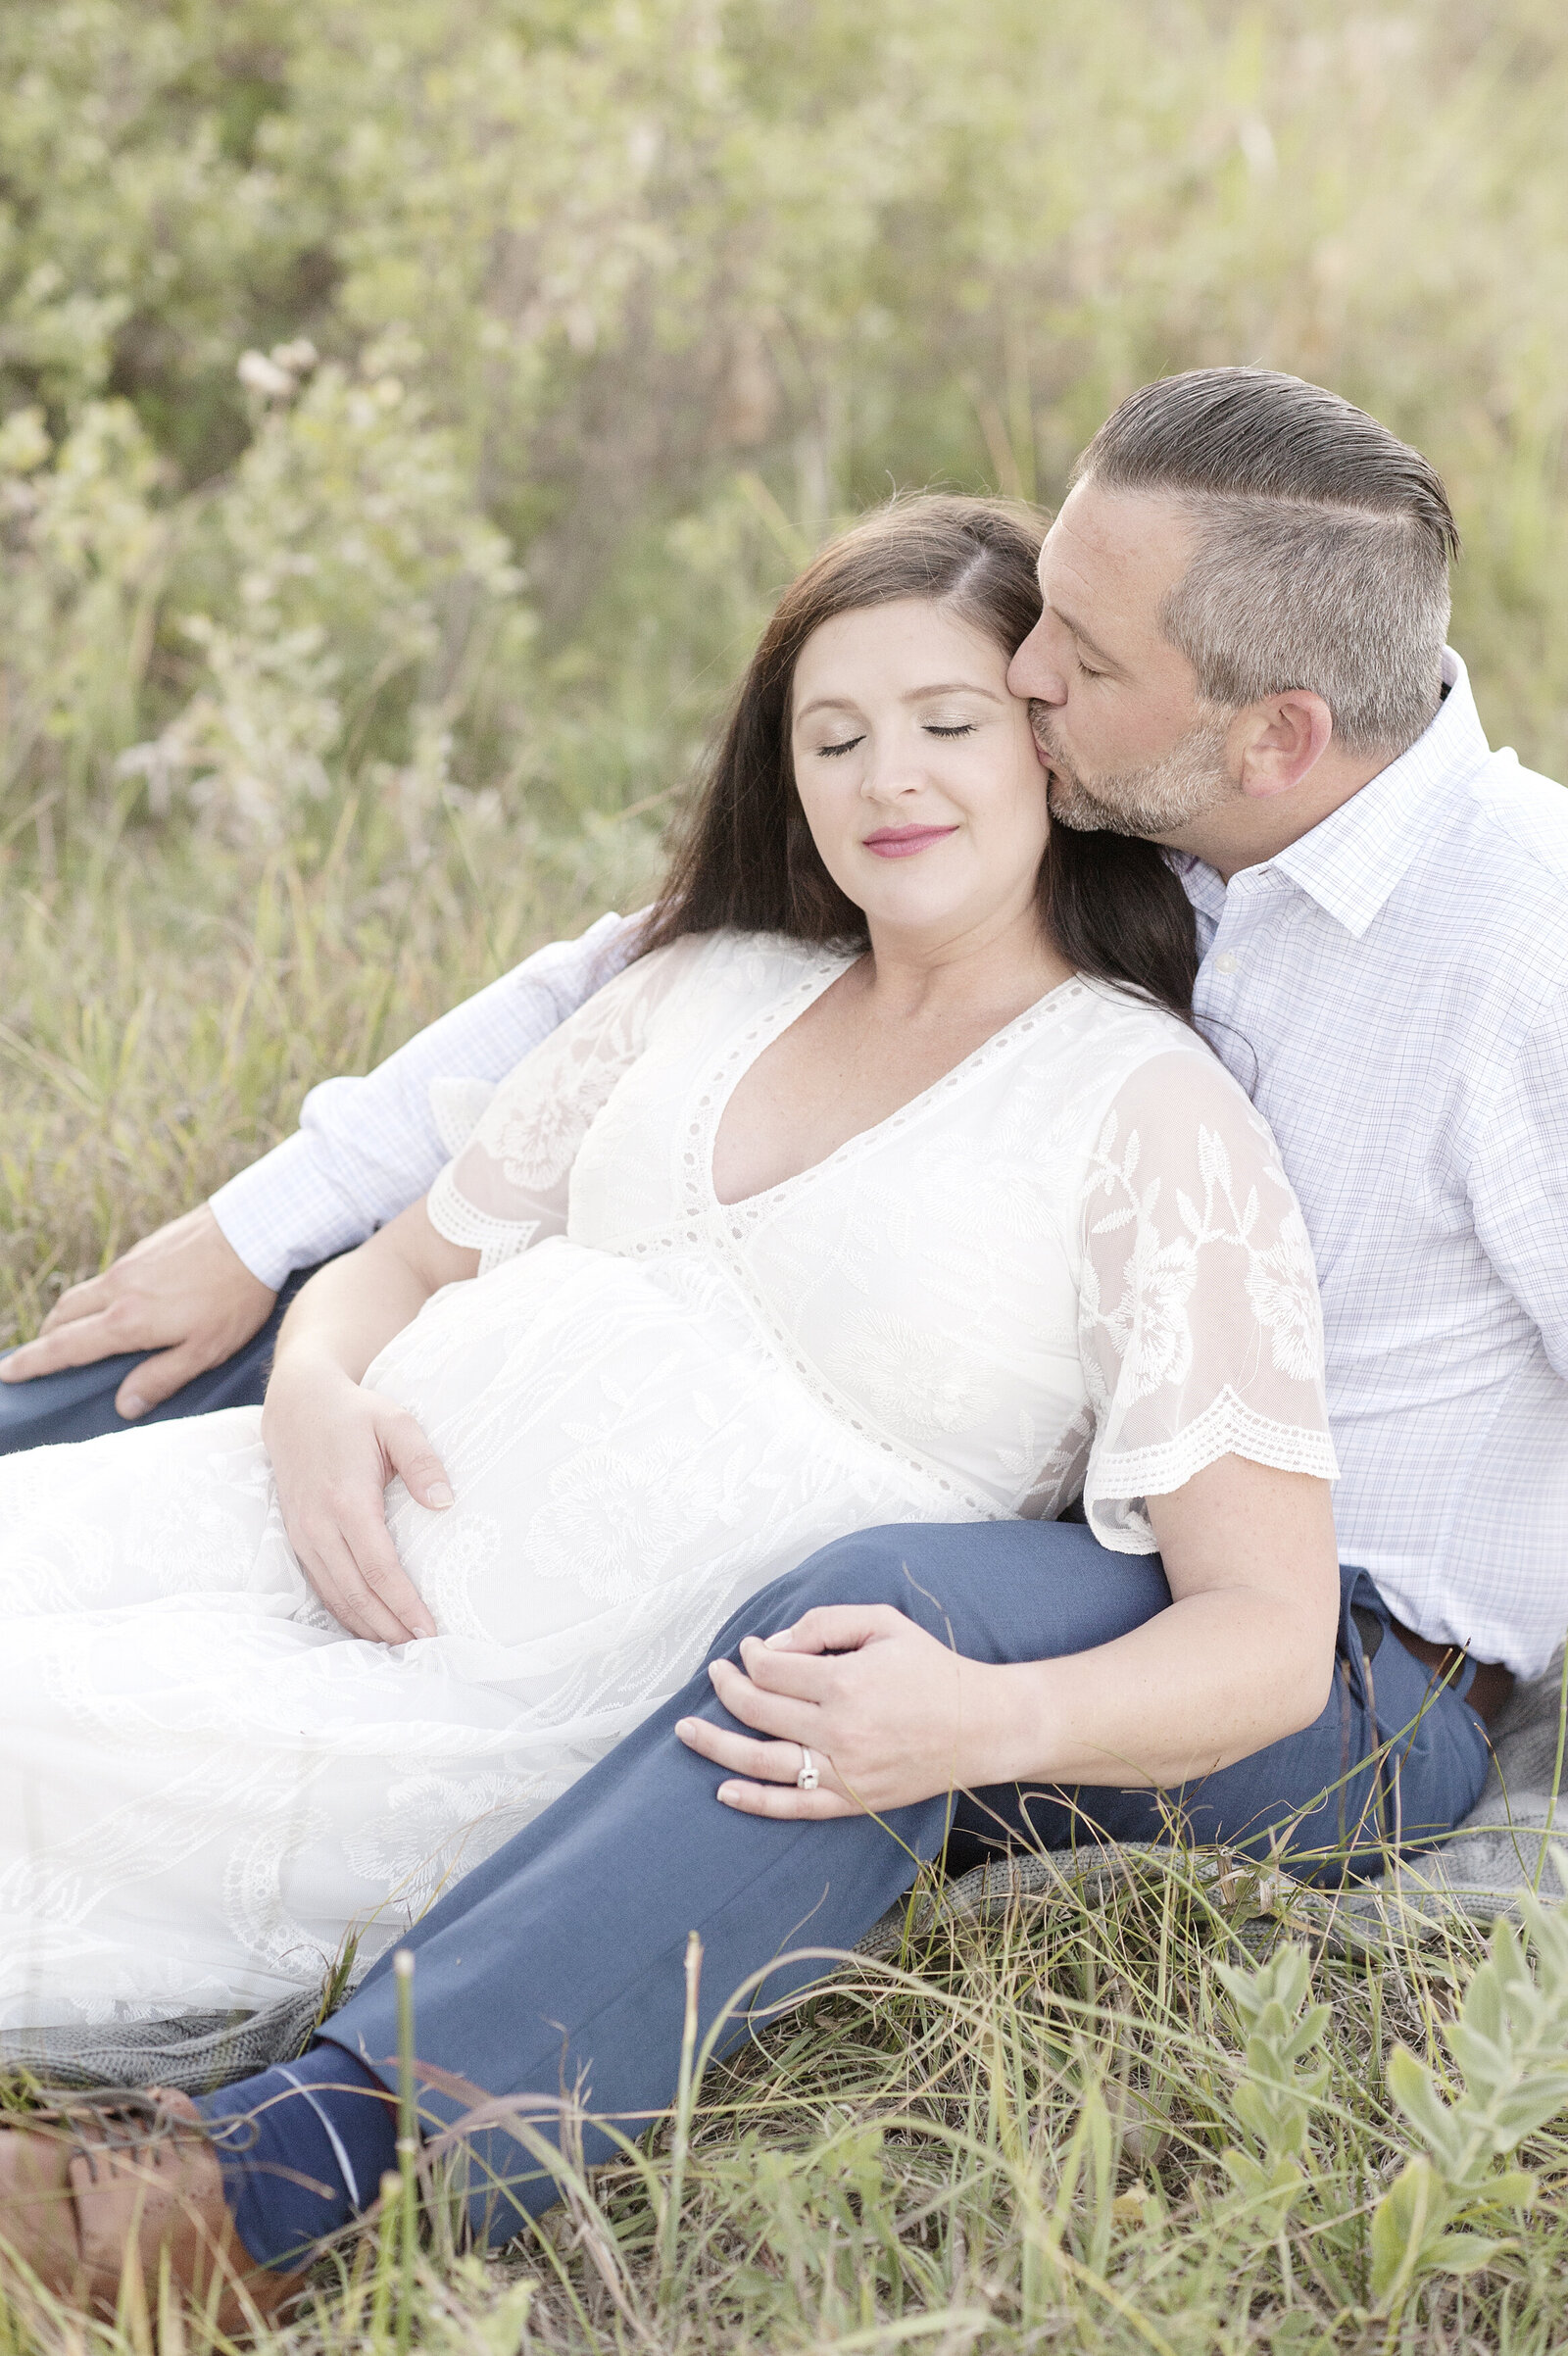 Dad kissing pregnant woman while sitting in grass